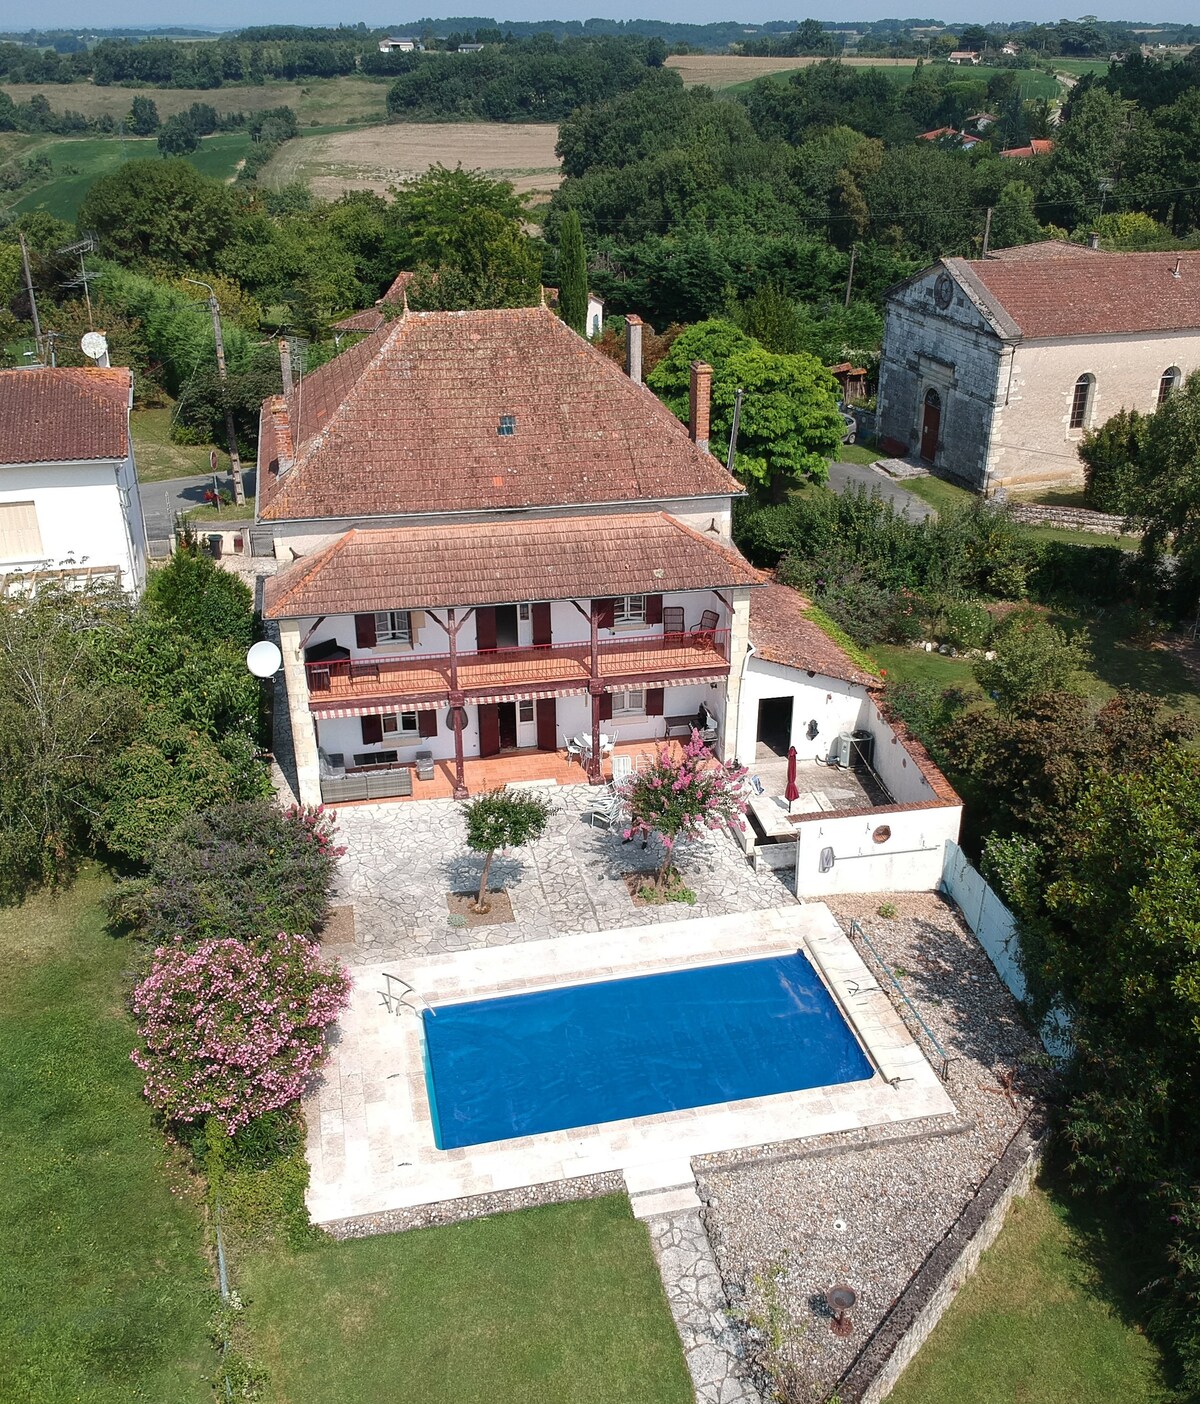 5-bedroom house with pool at edge of small village